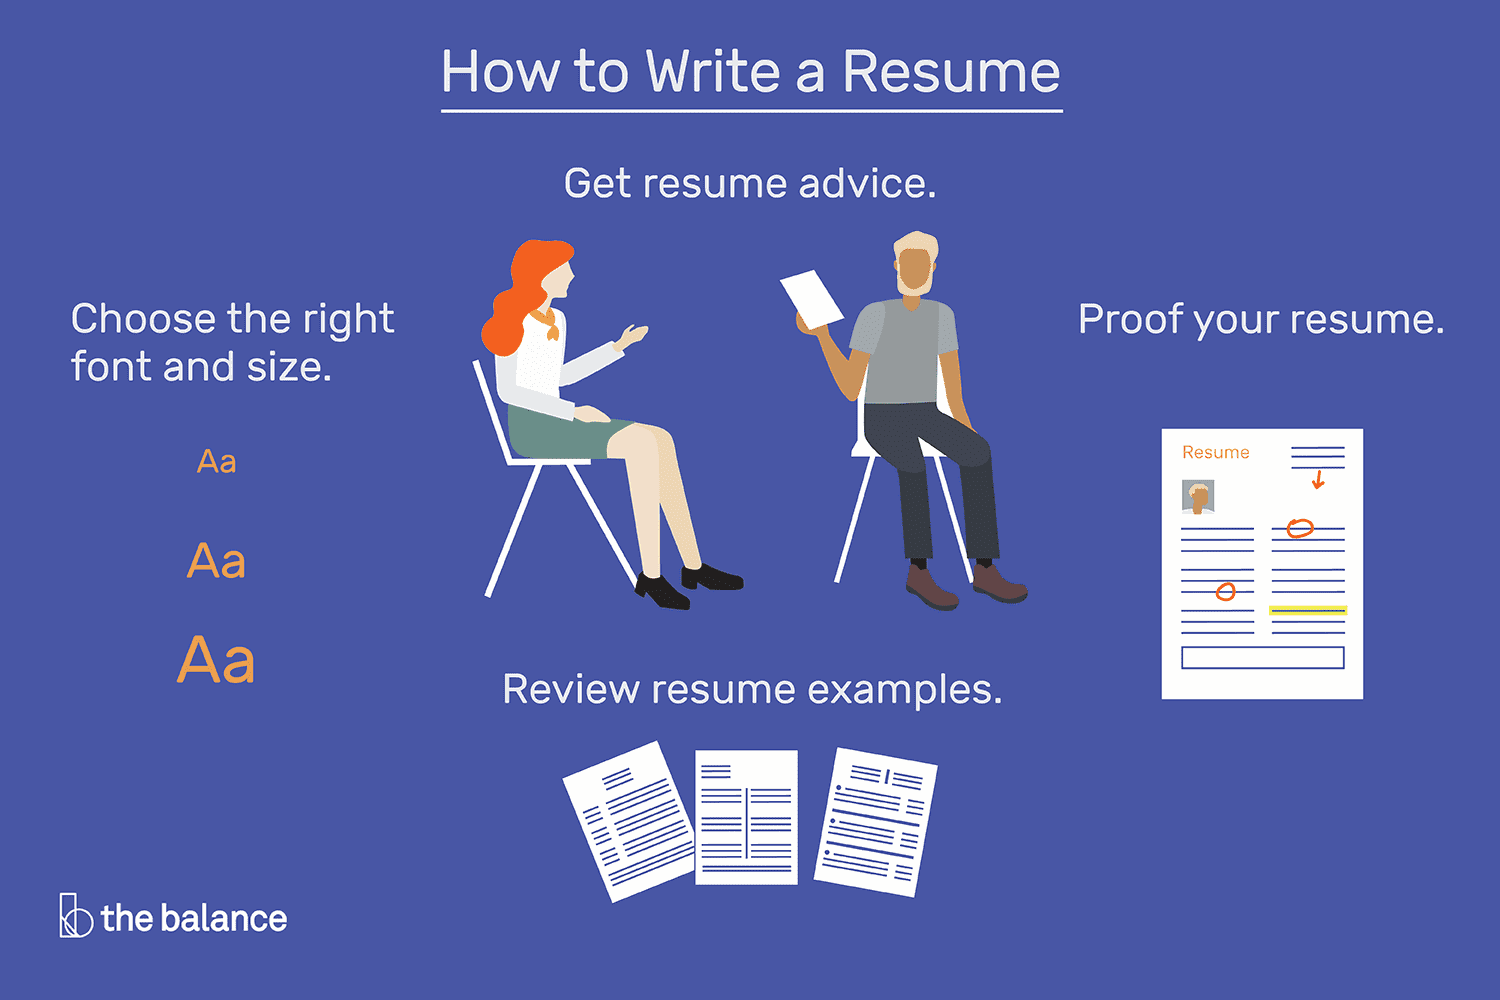 5 Amazing Tips For a Winning Resume